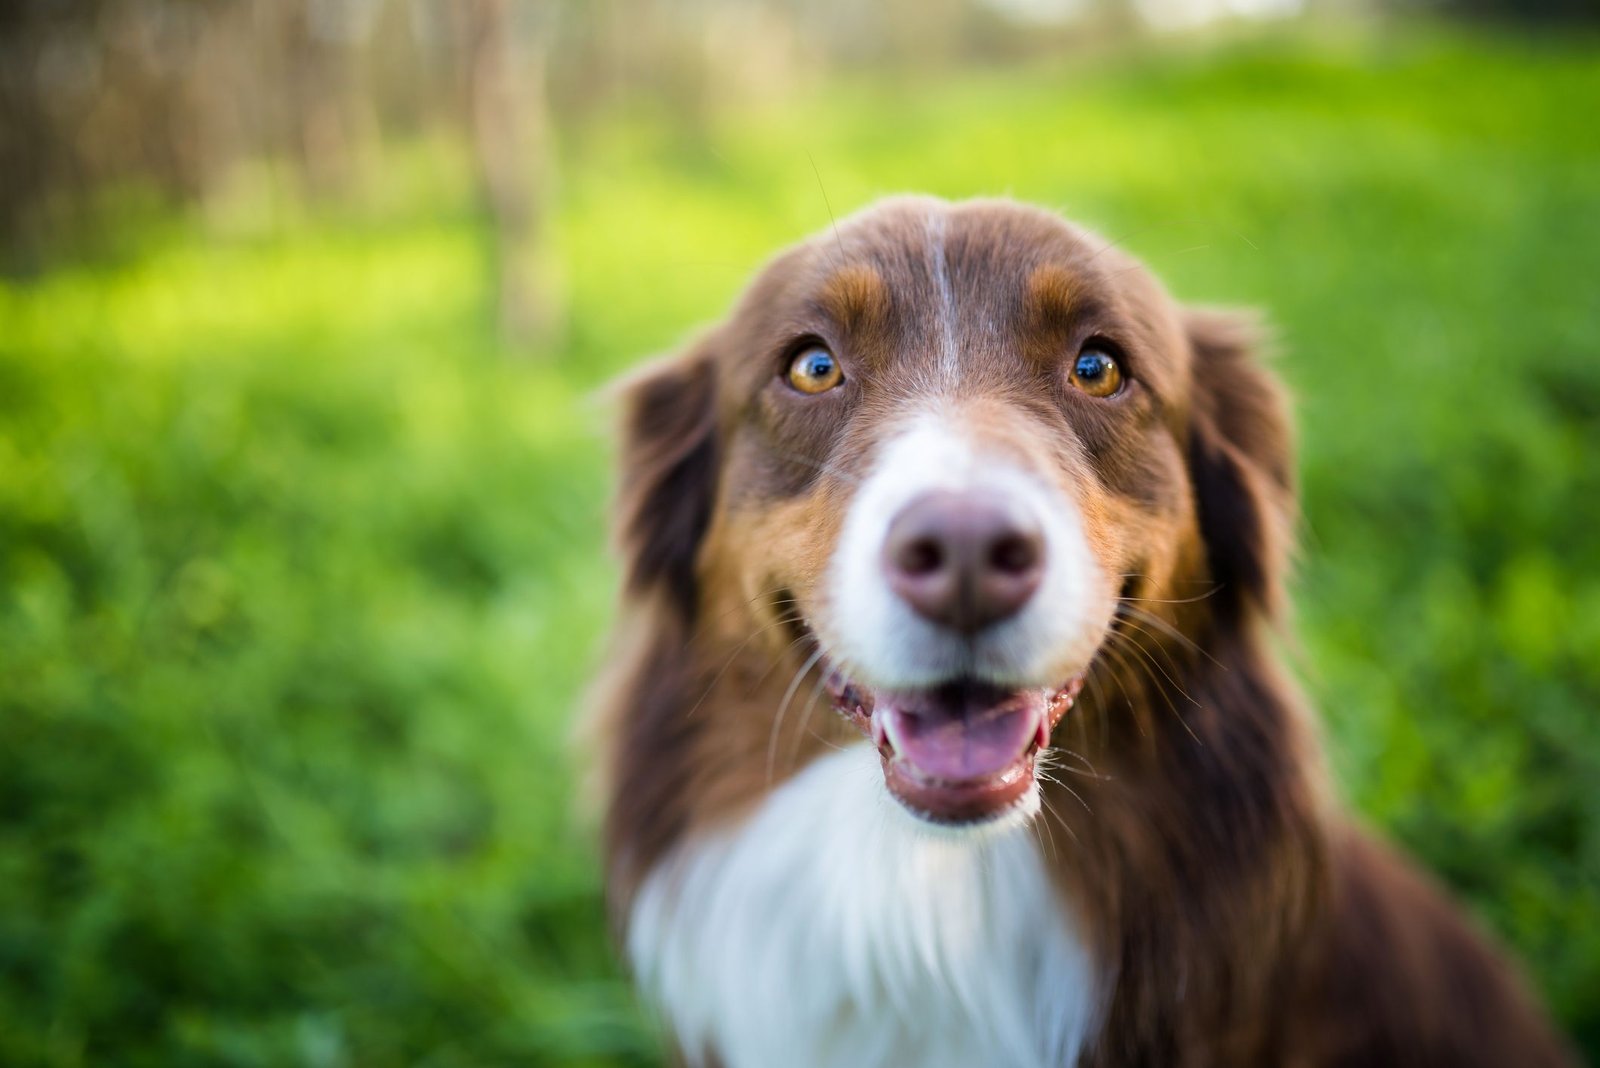 What Dogs Have the Least Health Issues? Top Hardy Breeds